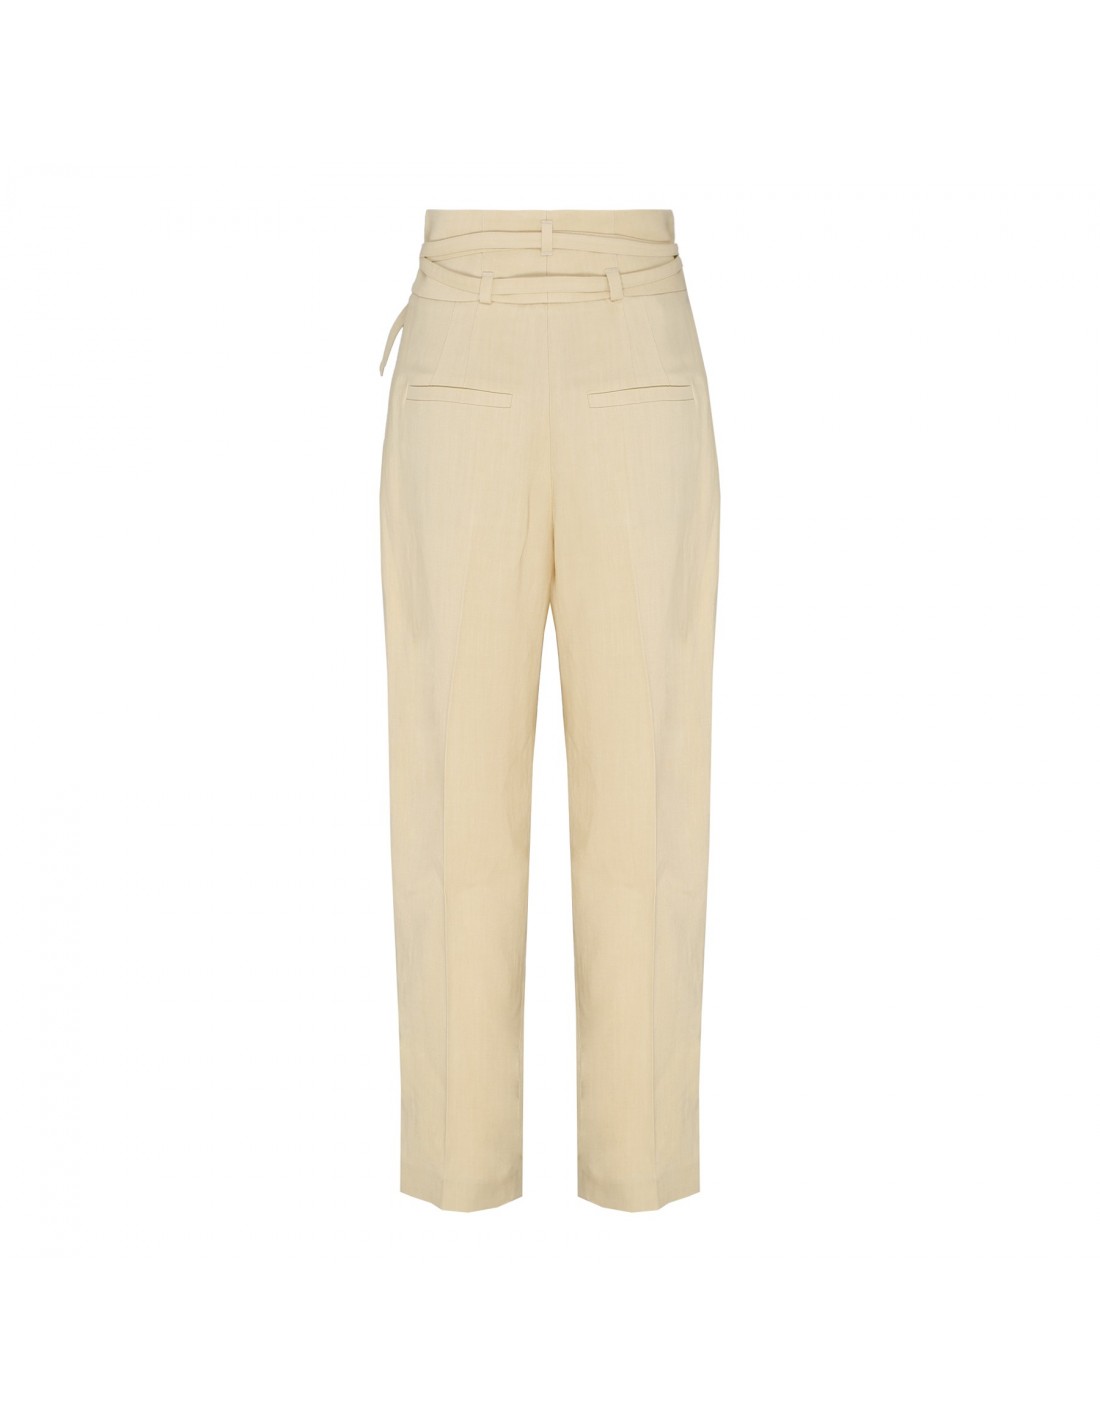 Taupe viscose and linen blend pants